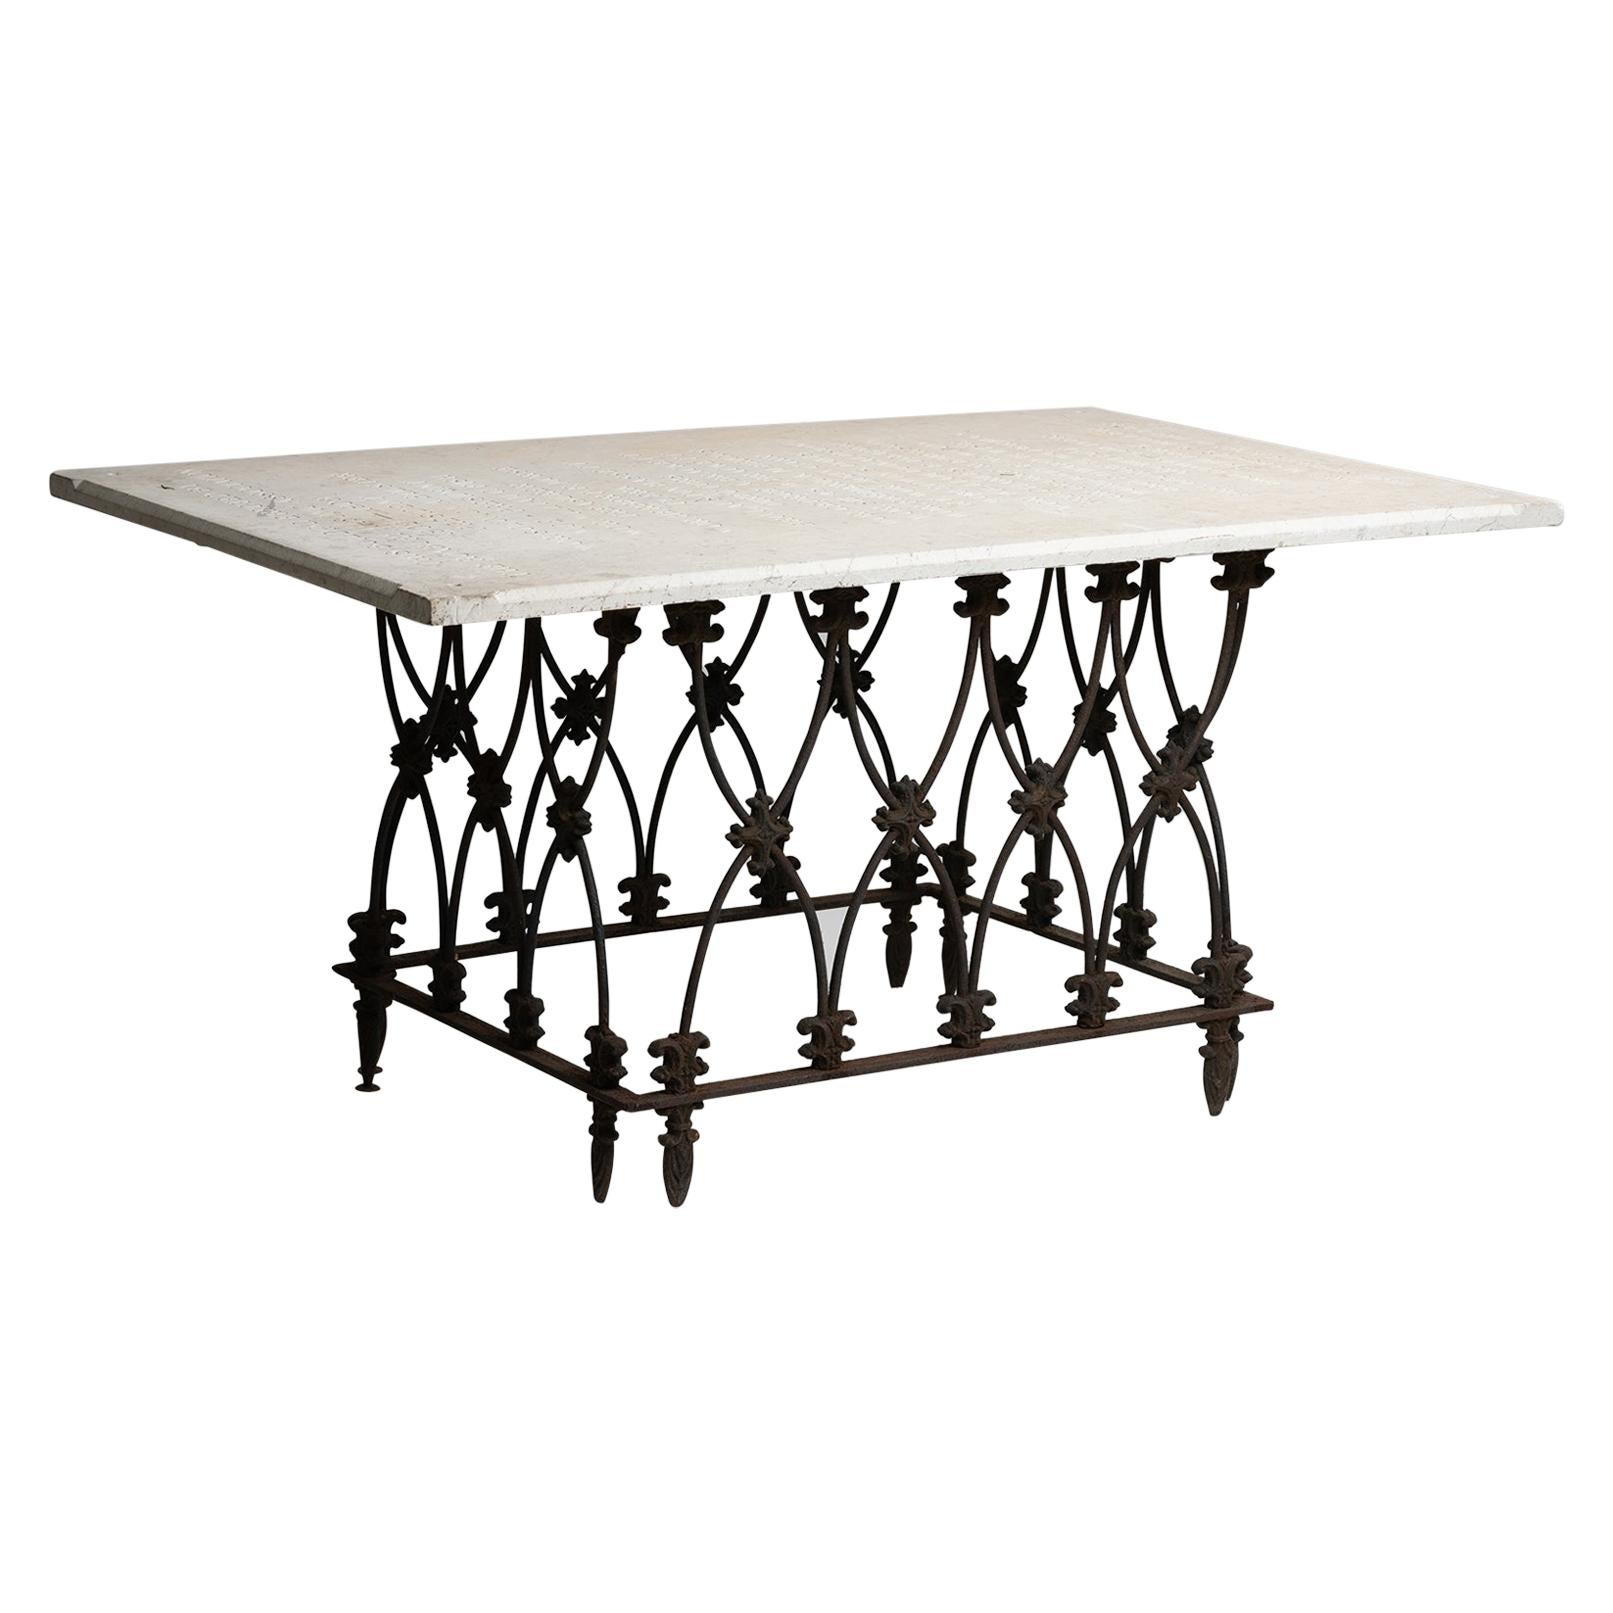 Marble and Ornate Iron Garden Table, America, 19th Century